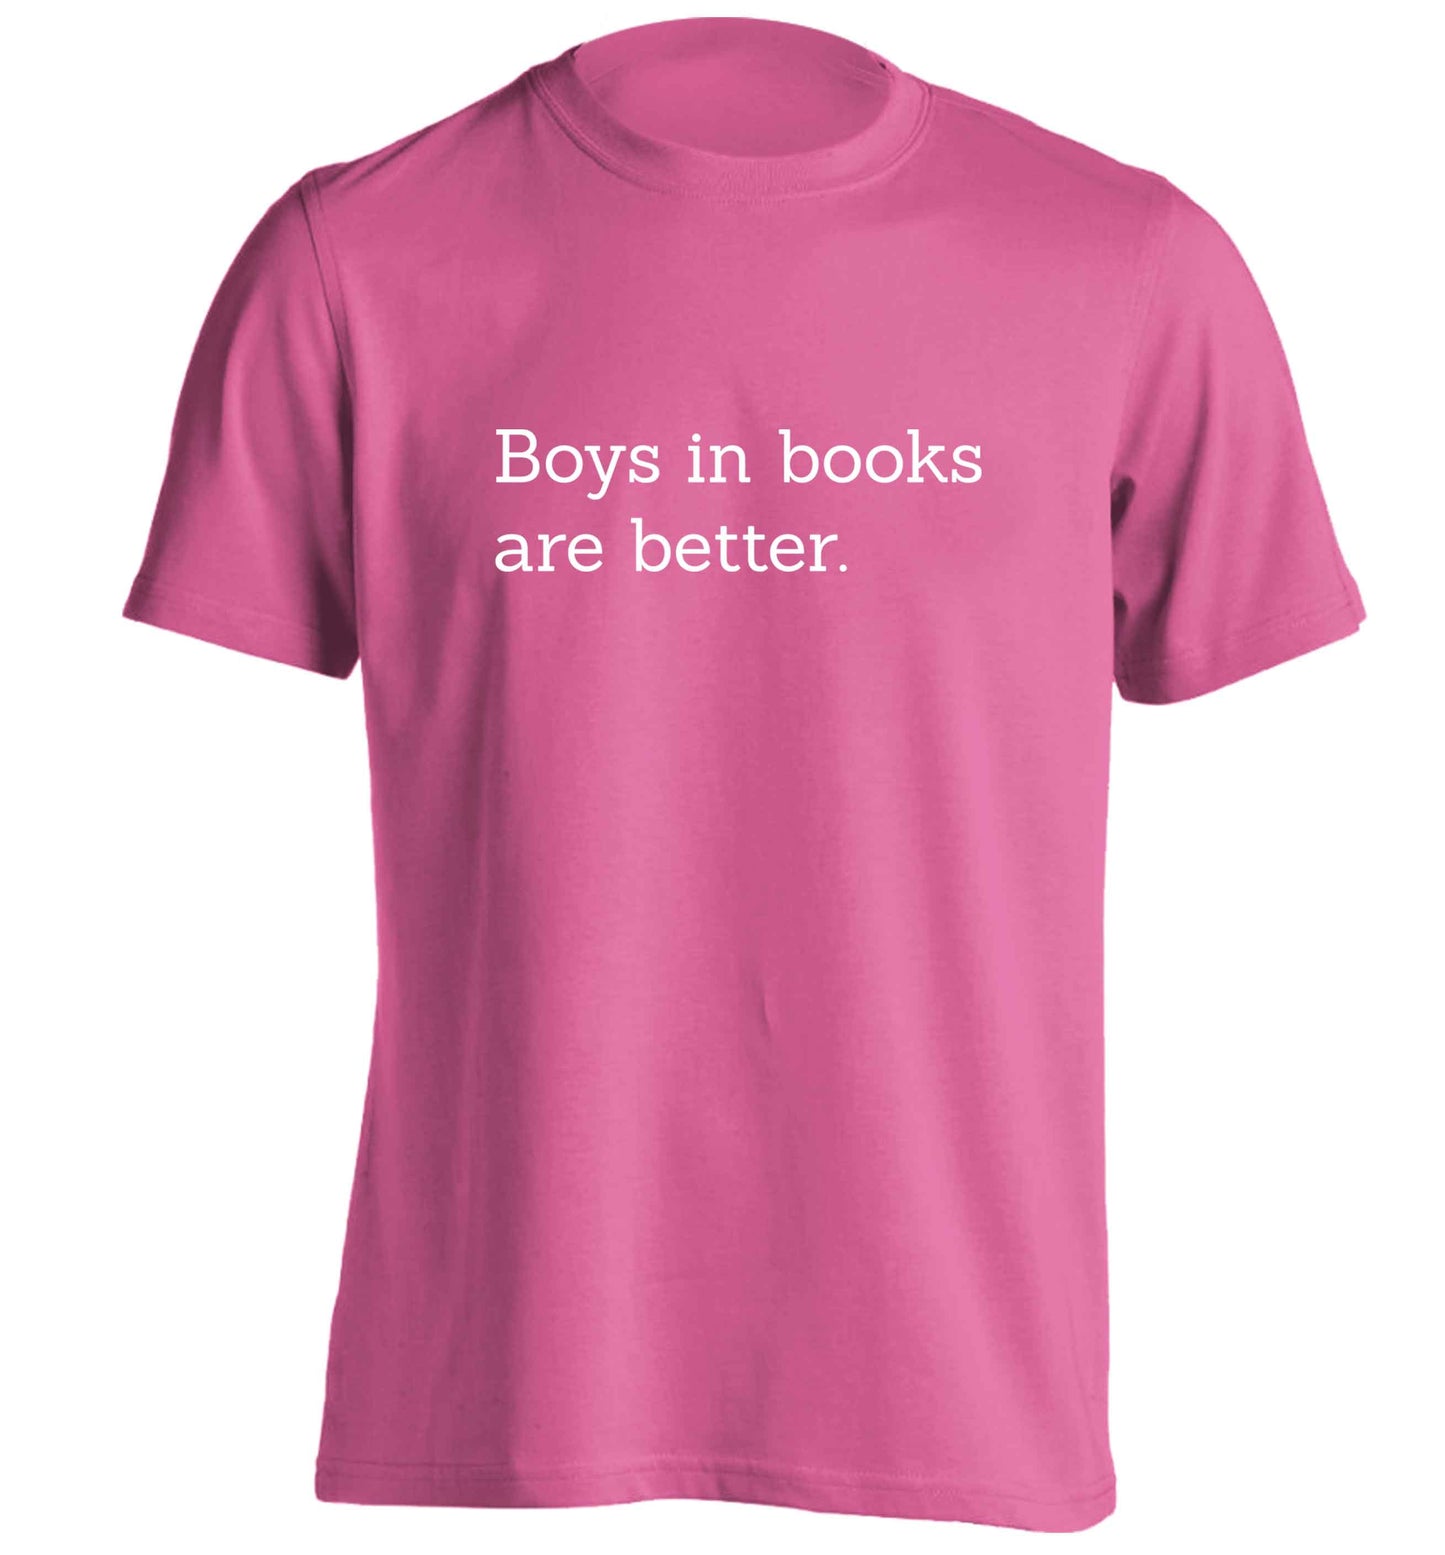 Boys in books are better adults unisex pink Tshirt 2XL